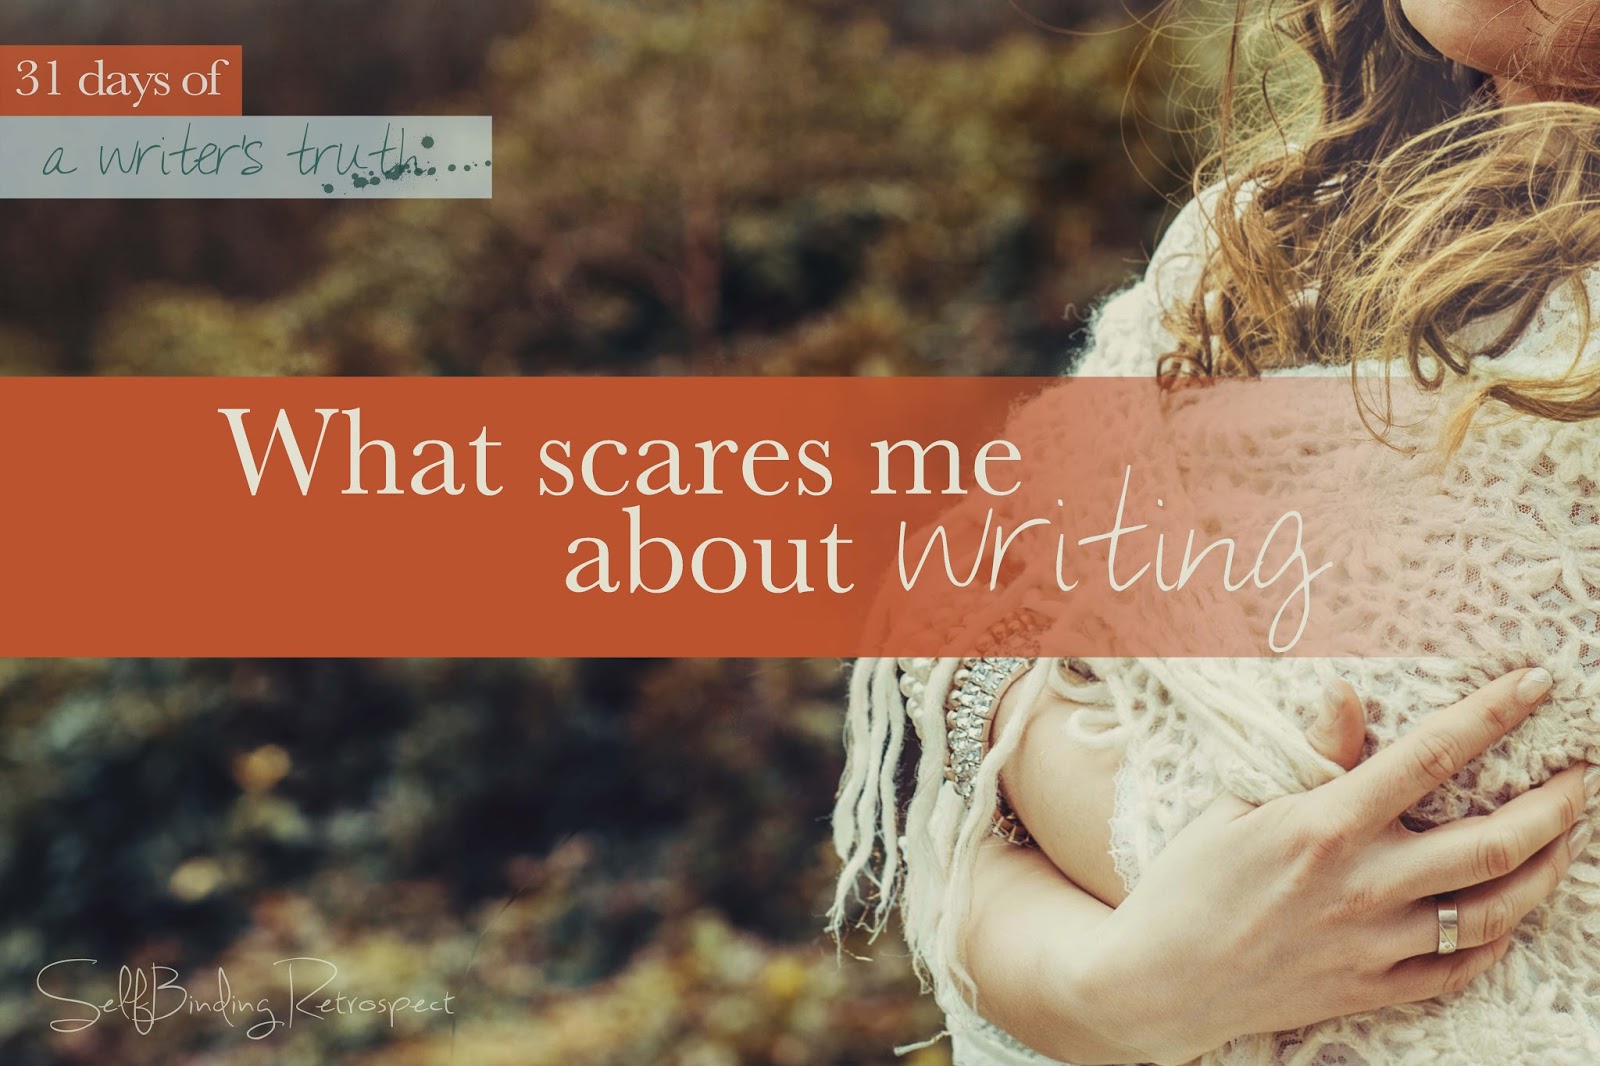 what scares me about writing? #write31days